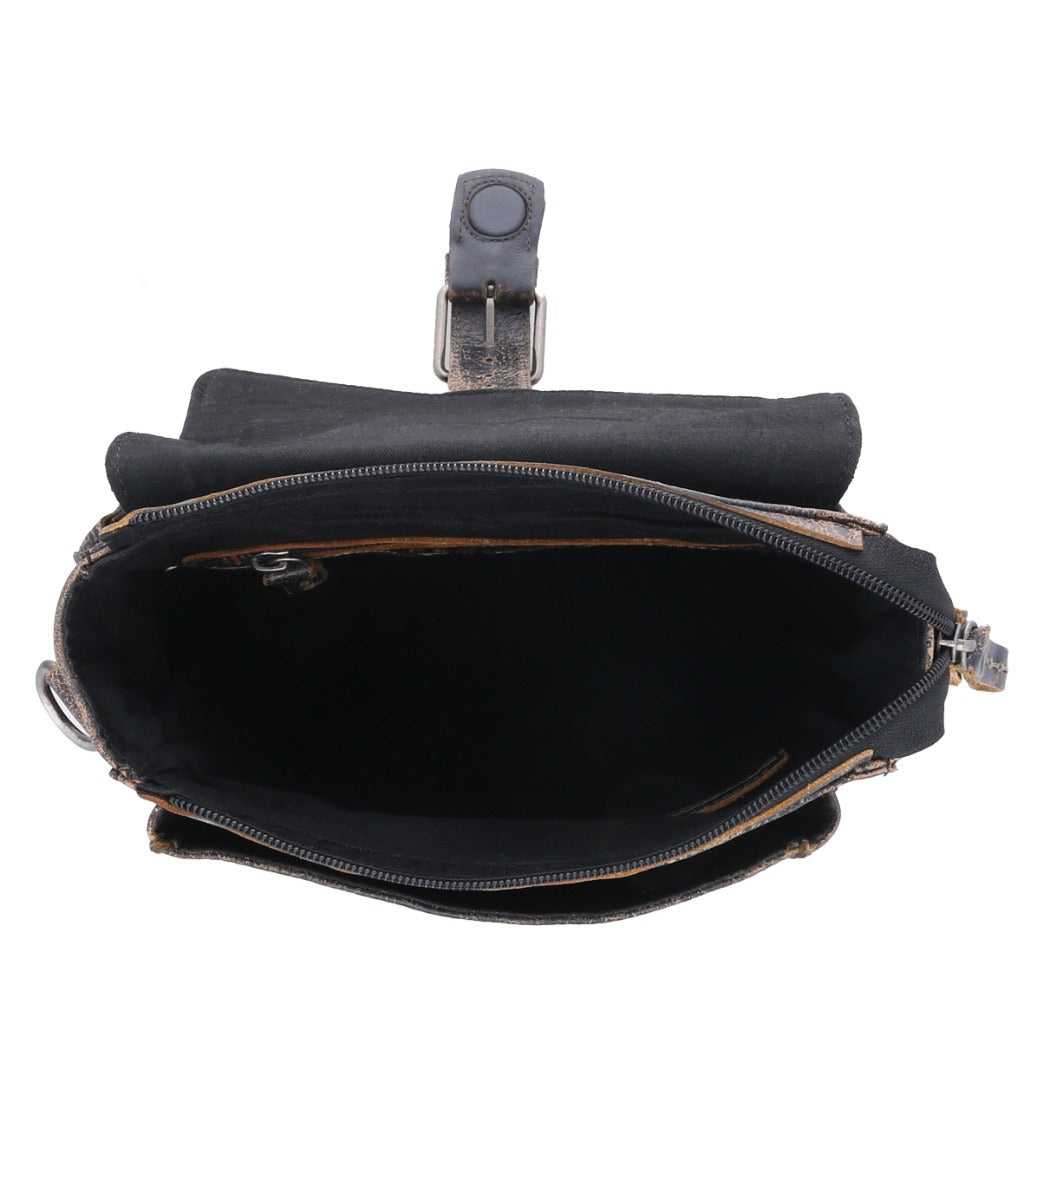 Open black leather Ainhoa LTC waist bag by Bed Stu with an adjustable strap and a visible interior, showing an empty main compartment and a closed front pocket, isolated on a white background.